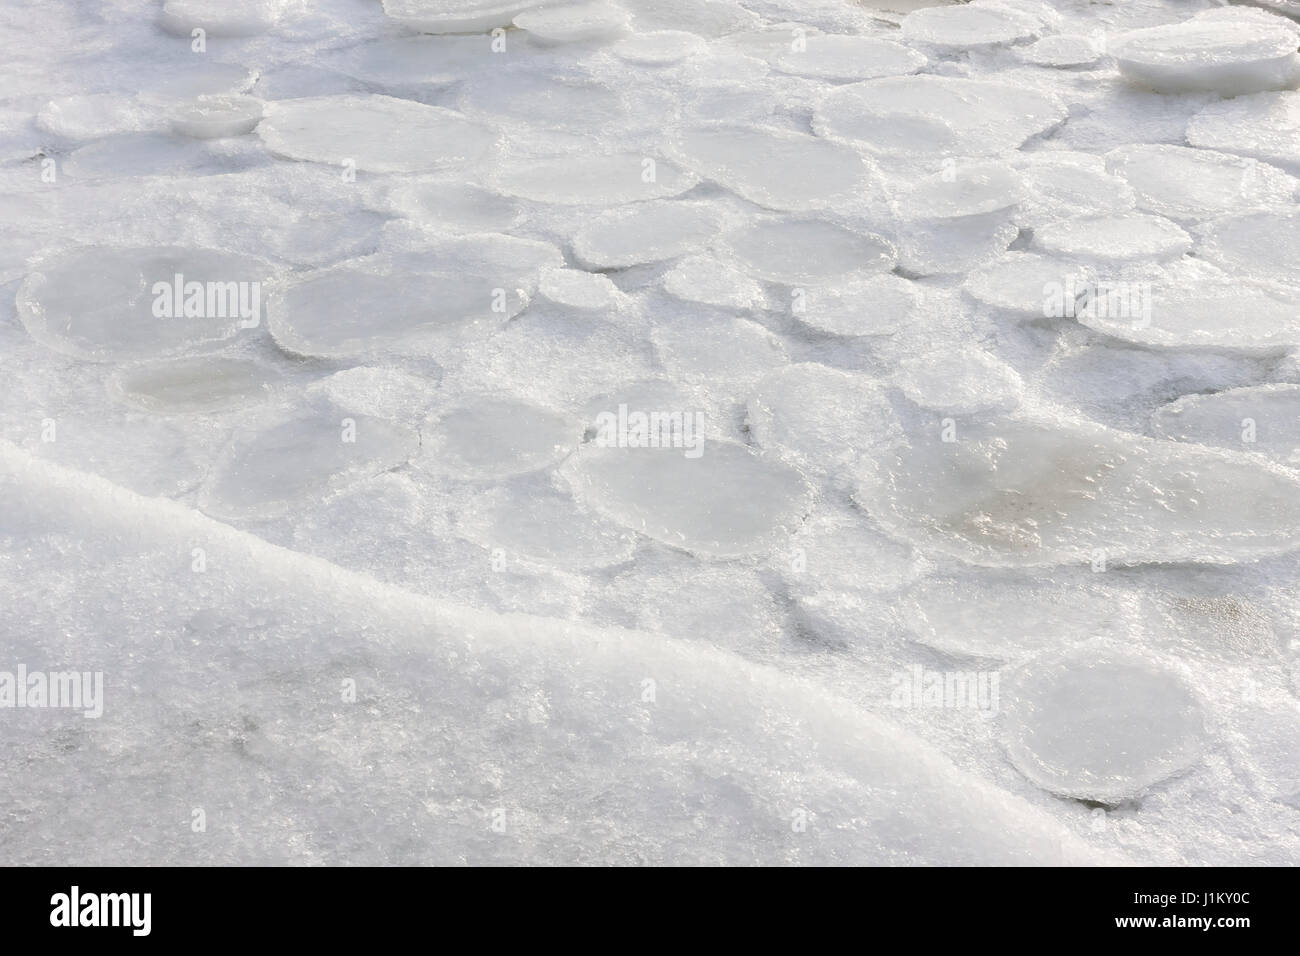 Natural shapes of round white circles formed into sea ice Stock Photo